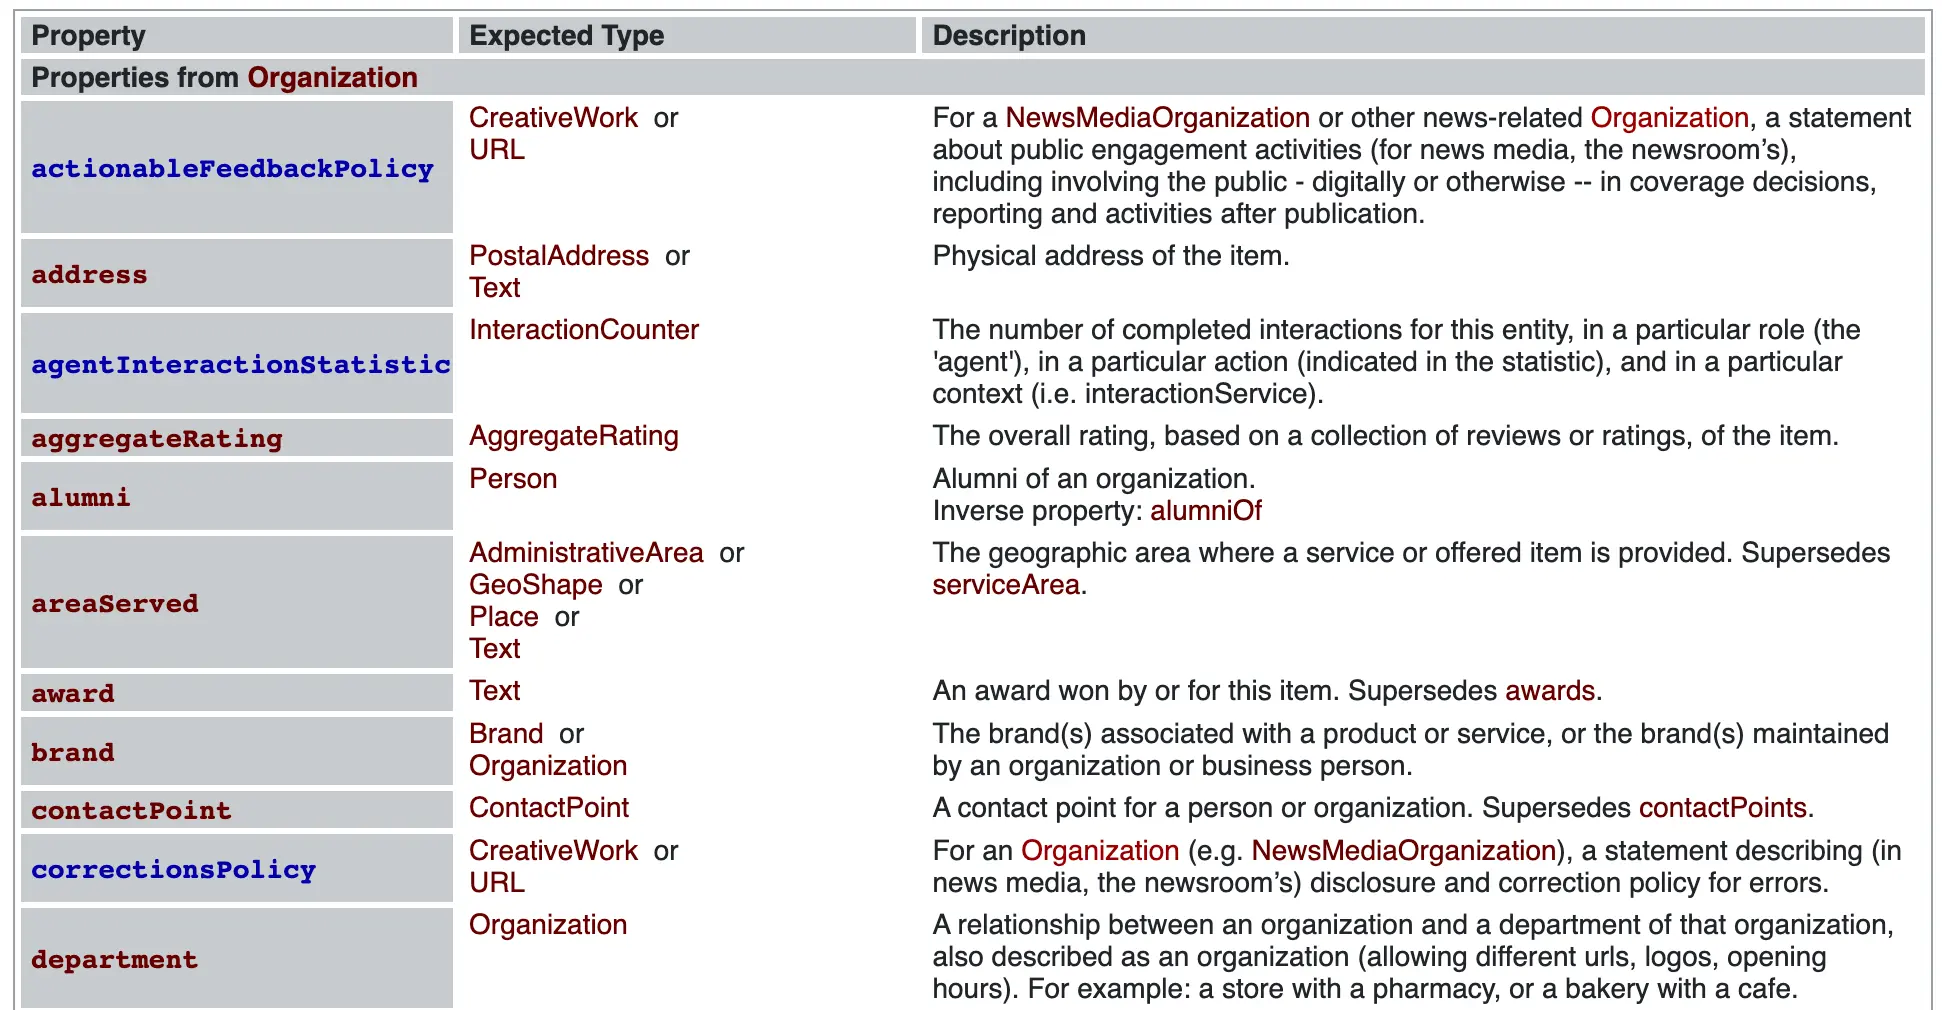 Screenshot of properties for Organization type on Schema.org with property type, expected type, and description in a chart, including address, areaServed, brand, contactPoint, department, and more.